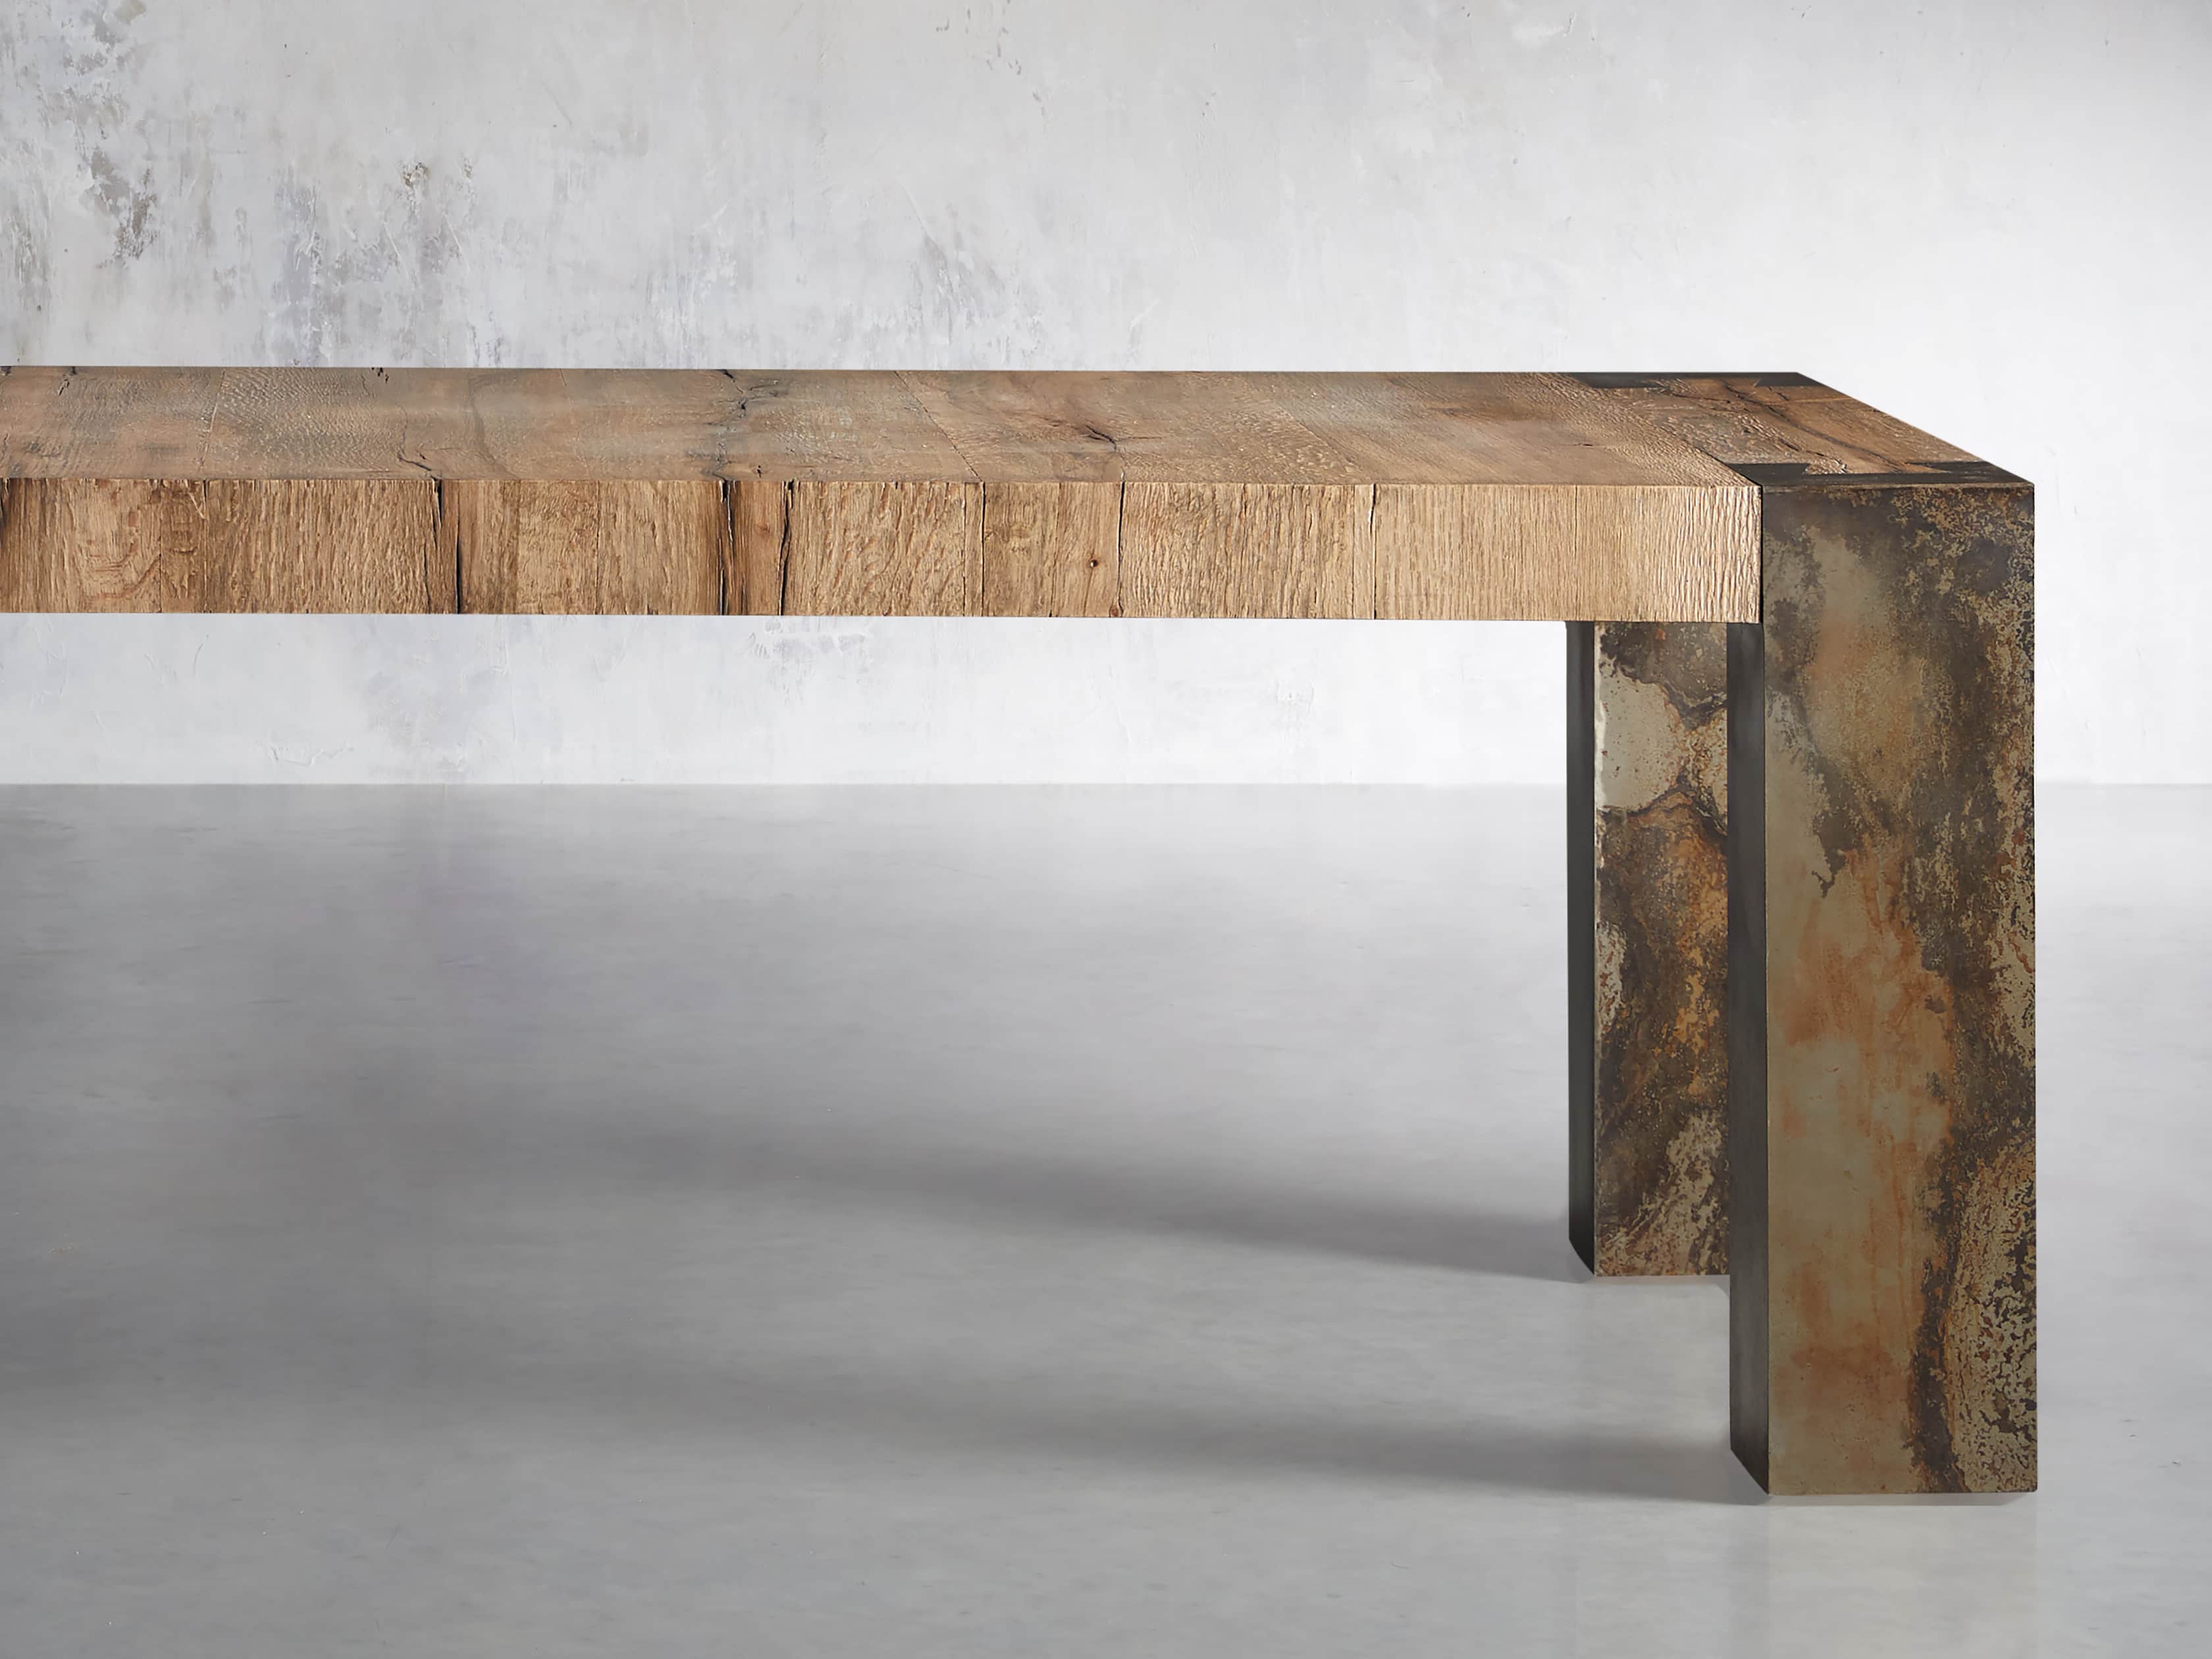 View the Telluride Dining Table